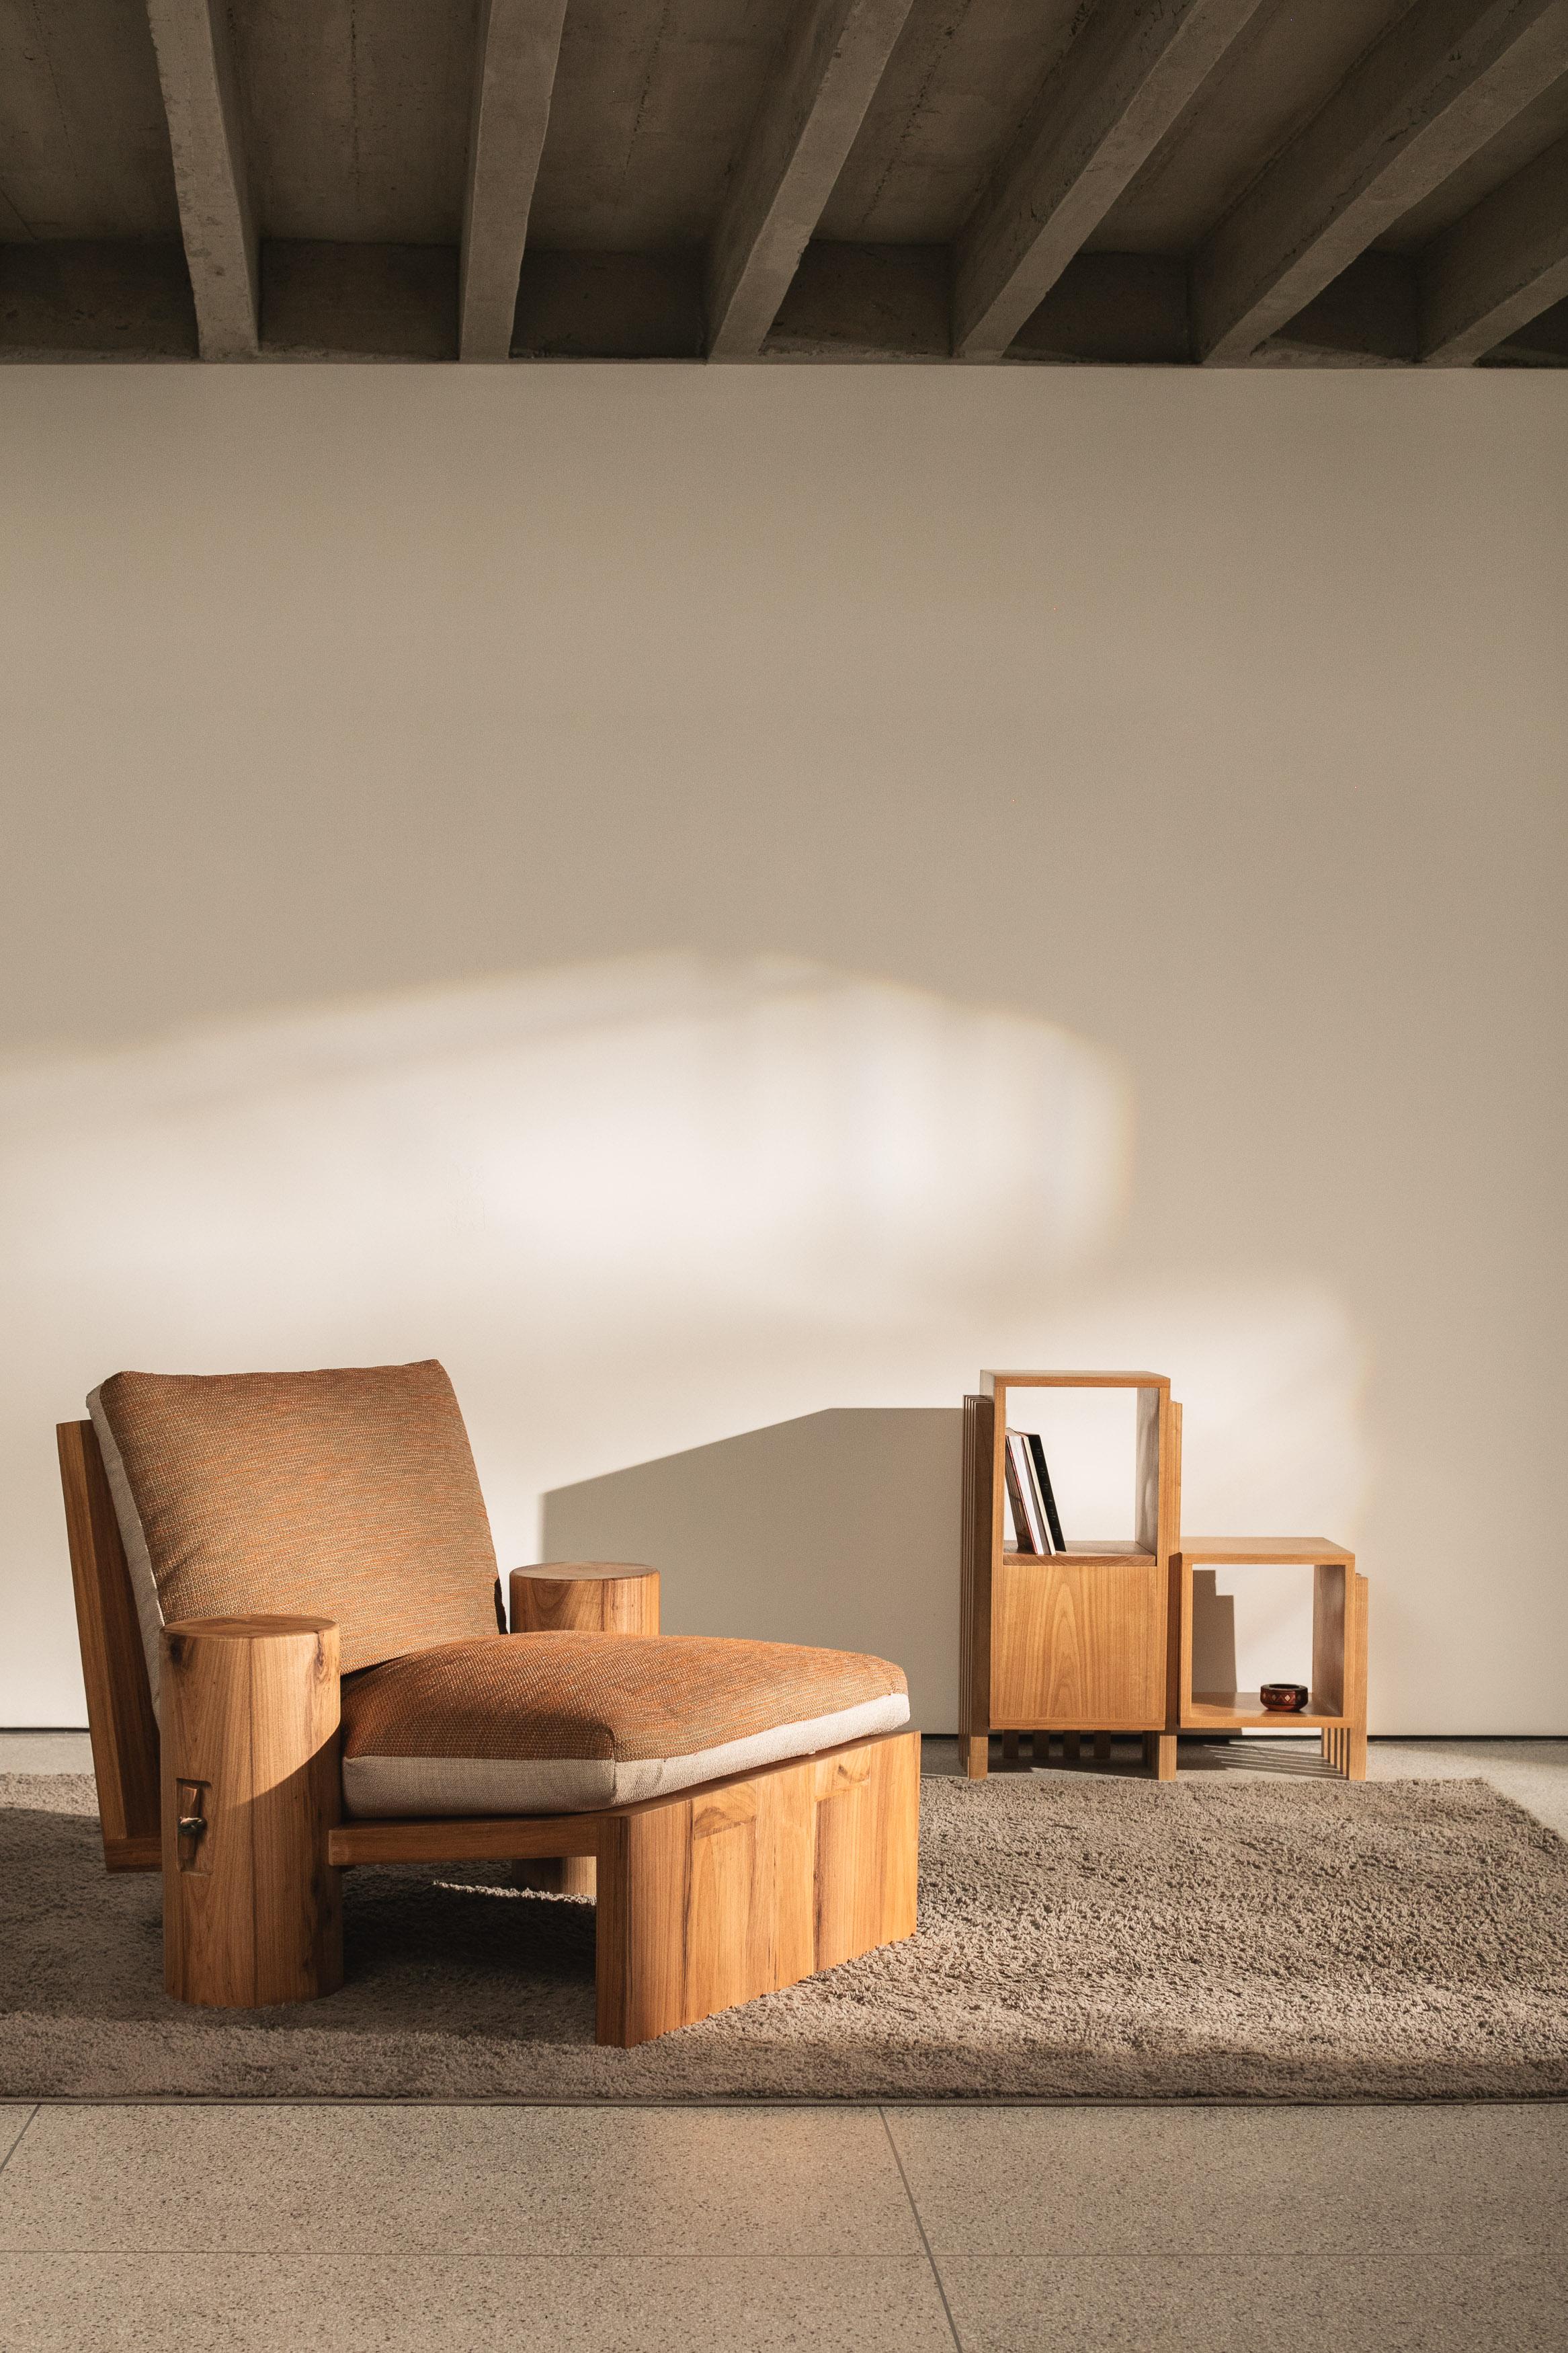 Cais Armchair by Filipe Ramos for GESTU in Brazilian Freijo hardwood In New Condition For Sale In Sao Paulo, Sao Paulo